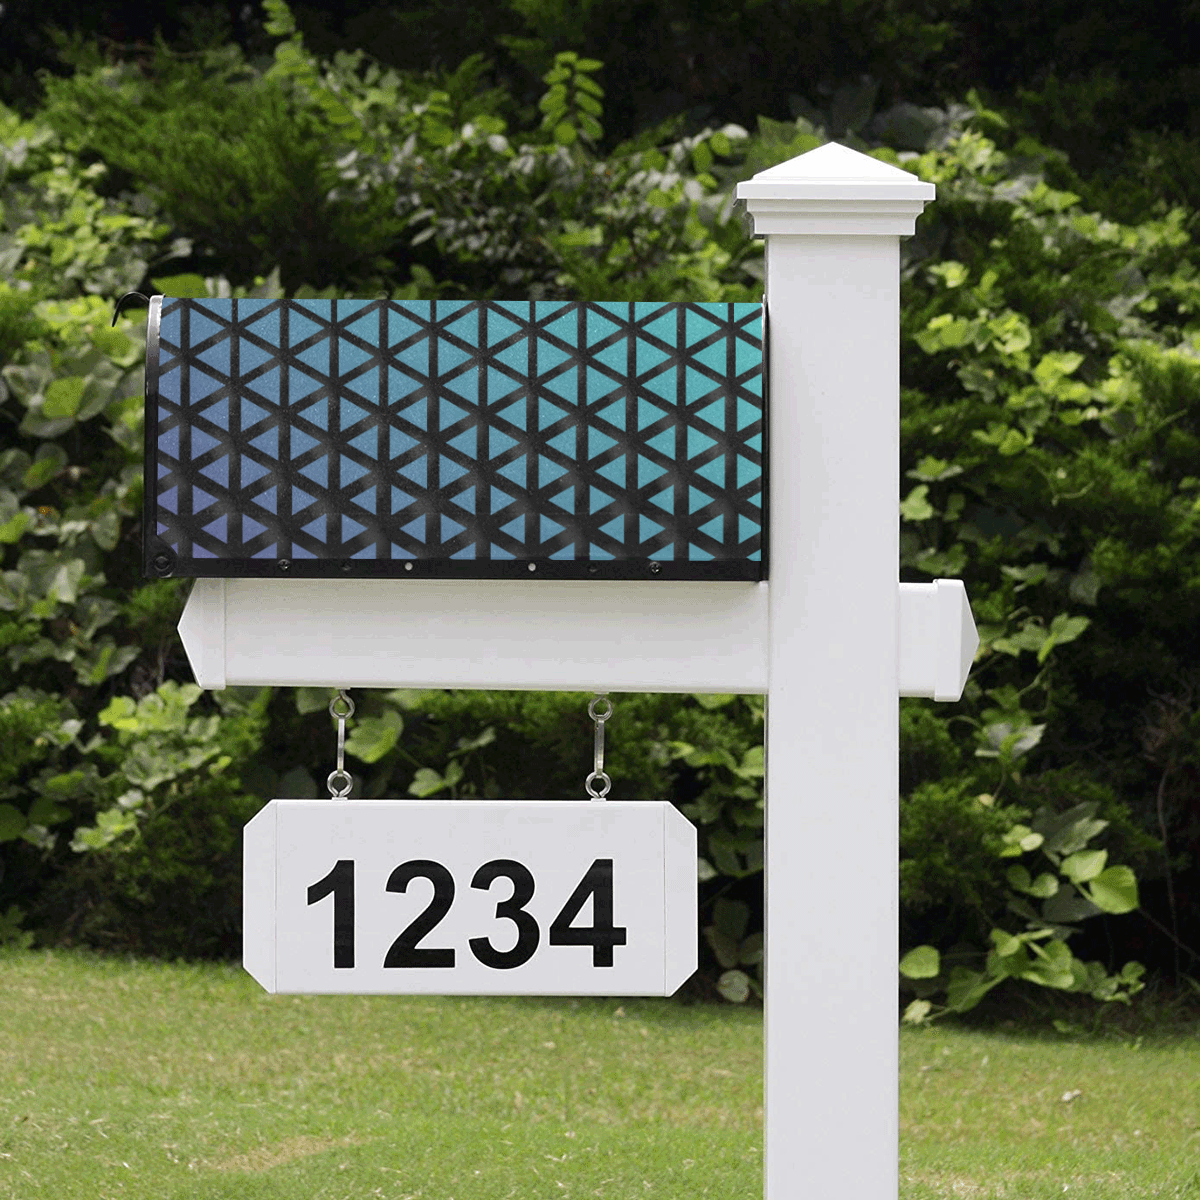 triangle patterns #pattern Mailbox Cover